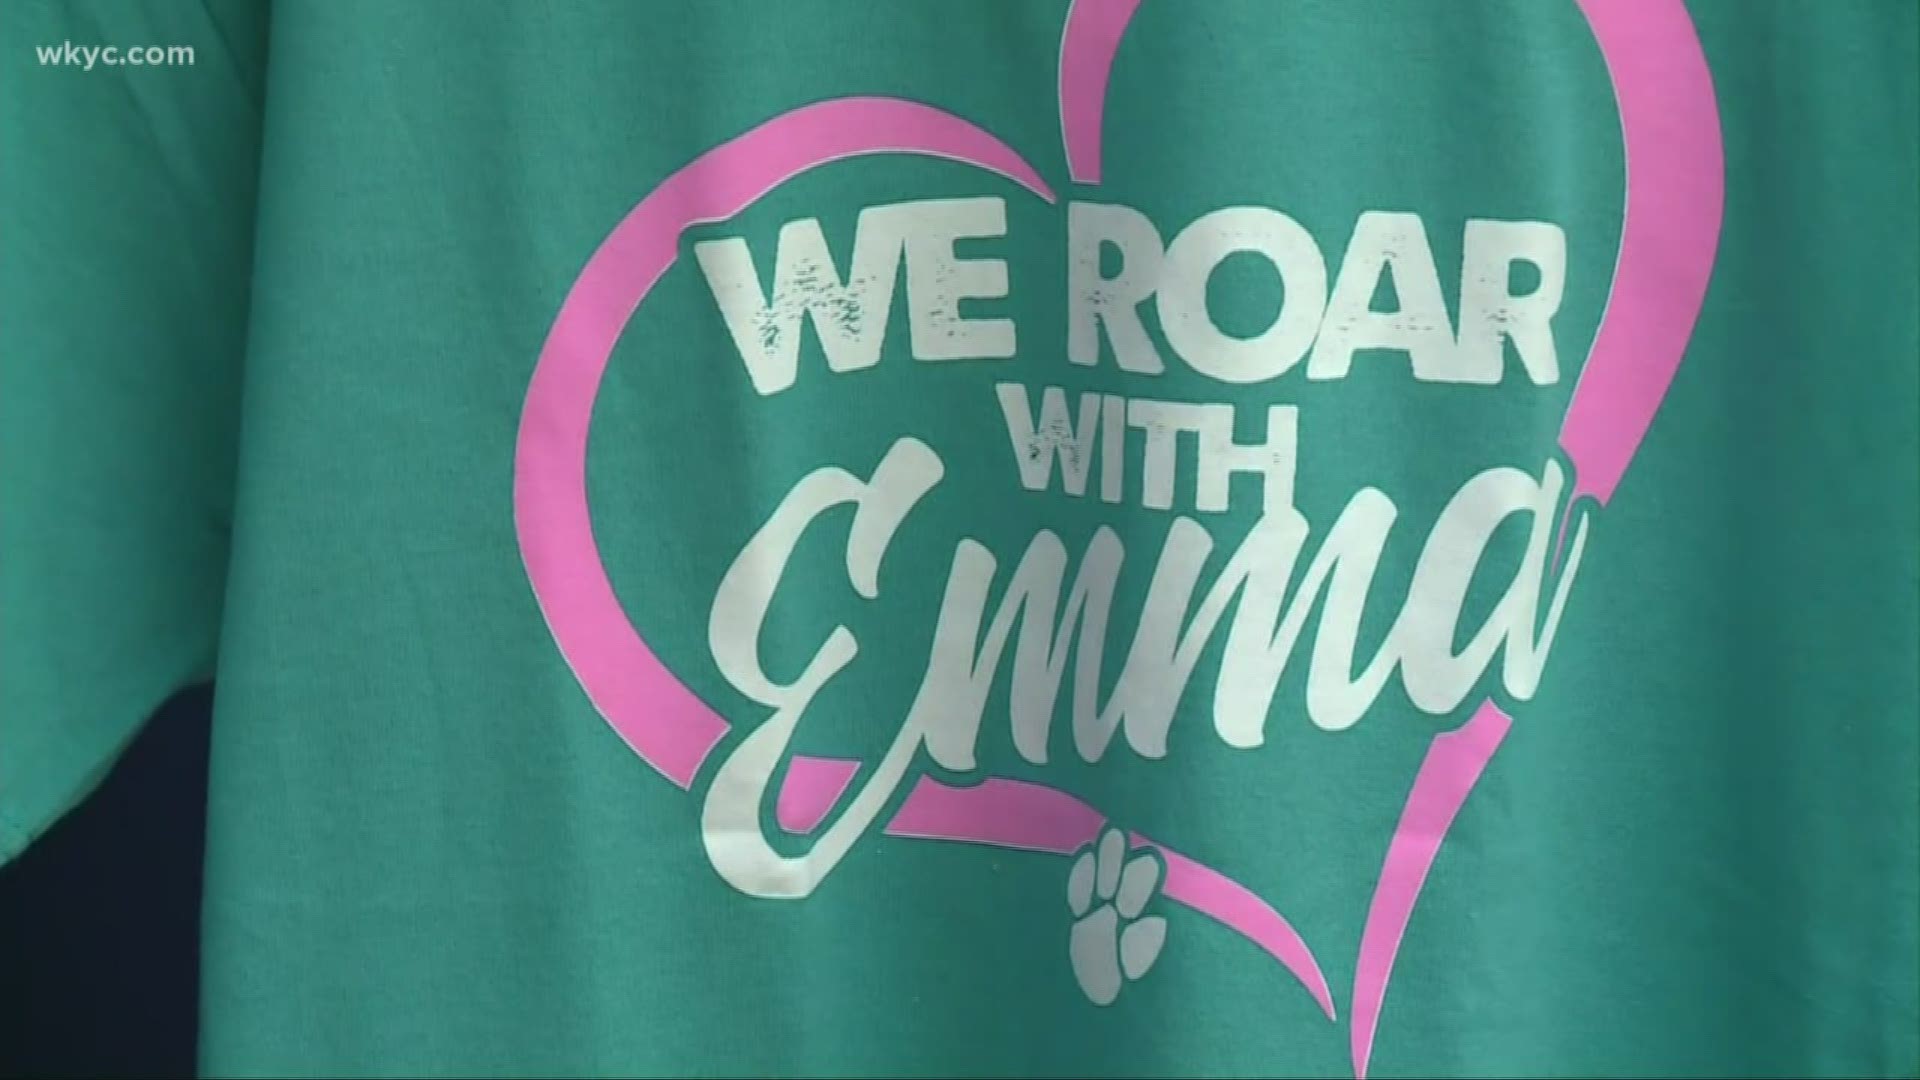 The #EmmaStrong movement is getting even bigger. On Saturday, the University of Akron hosted a doubleheader basketball fundraiser to help Emma's family.